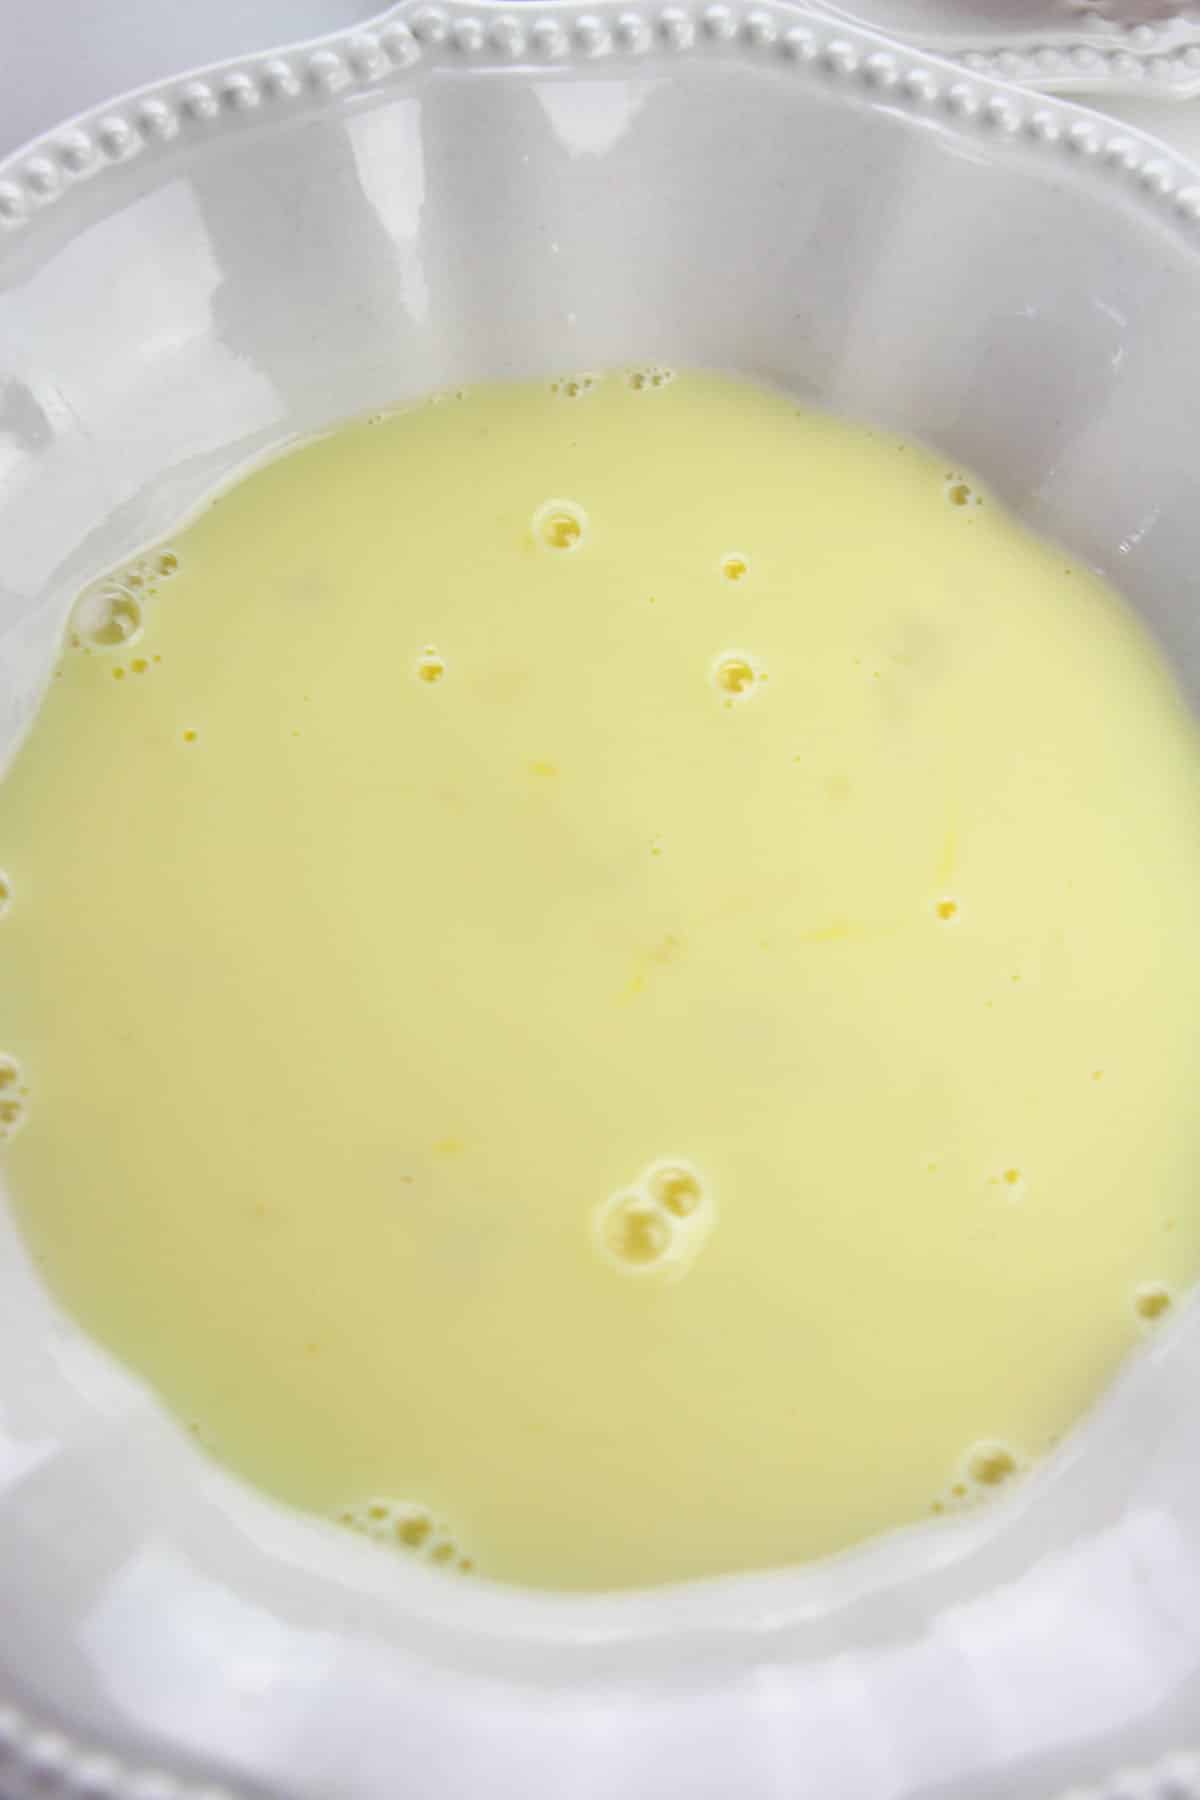 Milk and egg mixture in dish